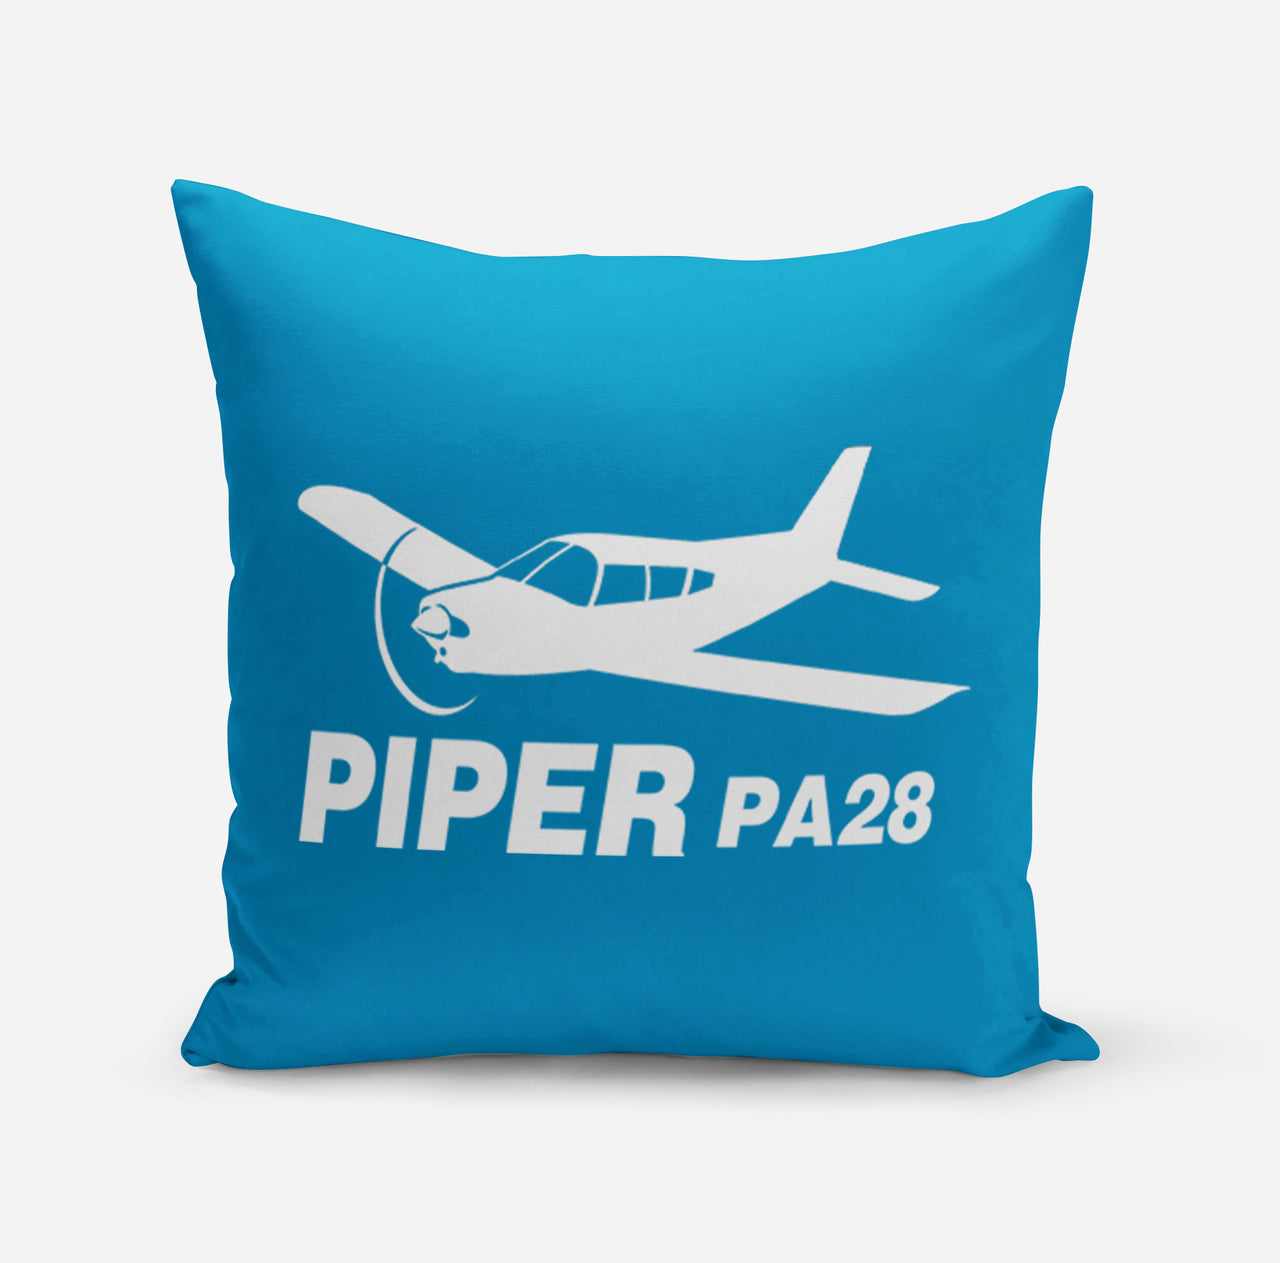 The Piper PA28 Designed Pillows